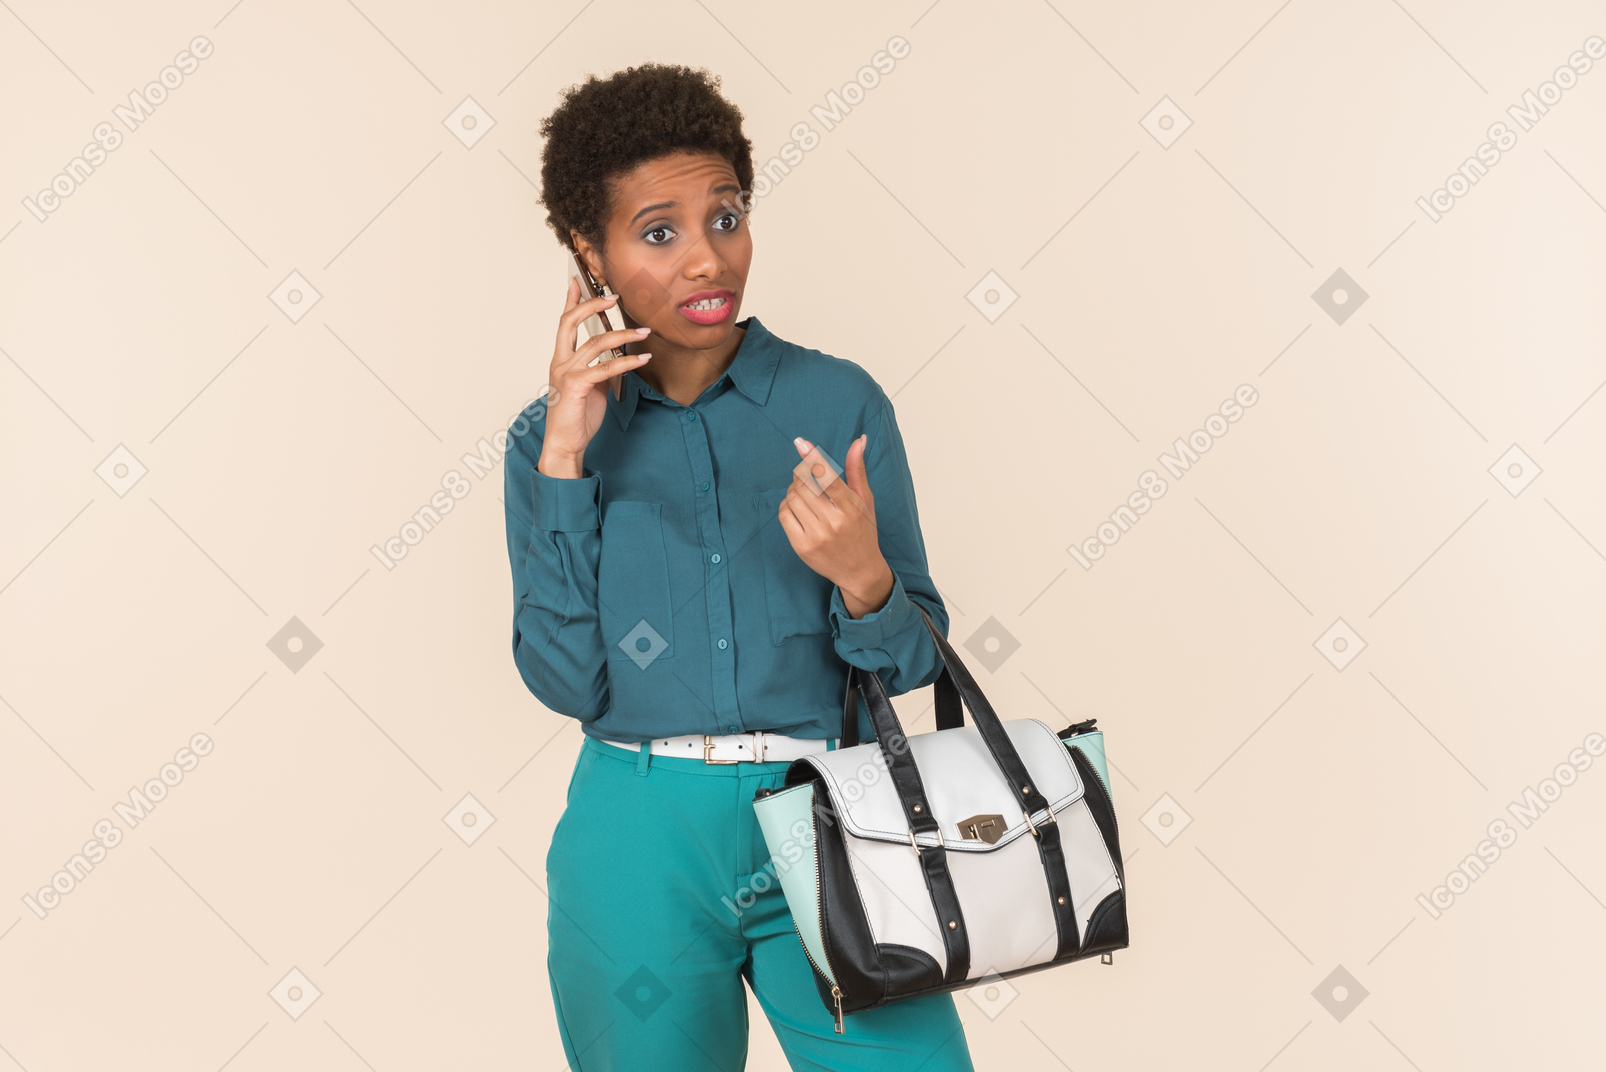 Not satisfied with something young woman talking on the phone and holding bag